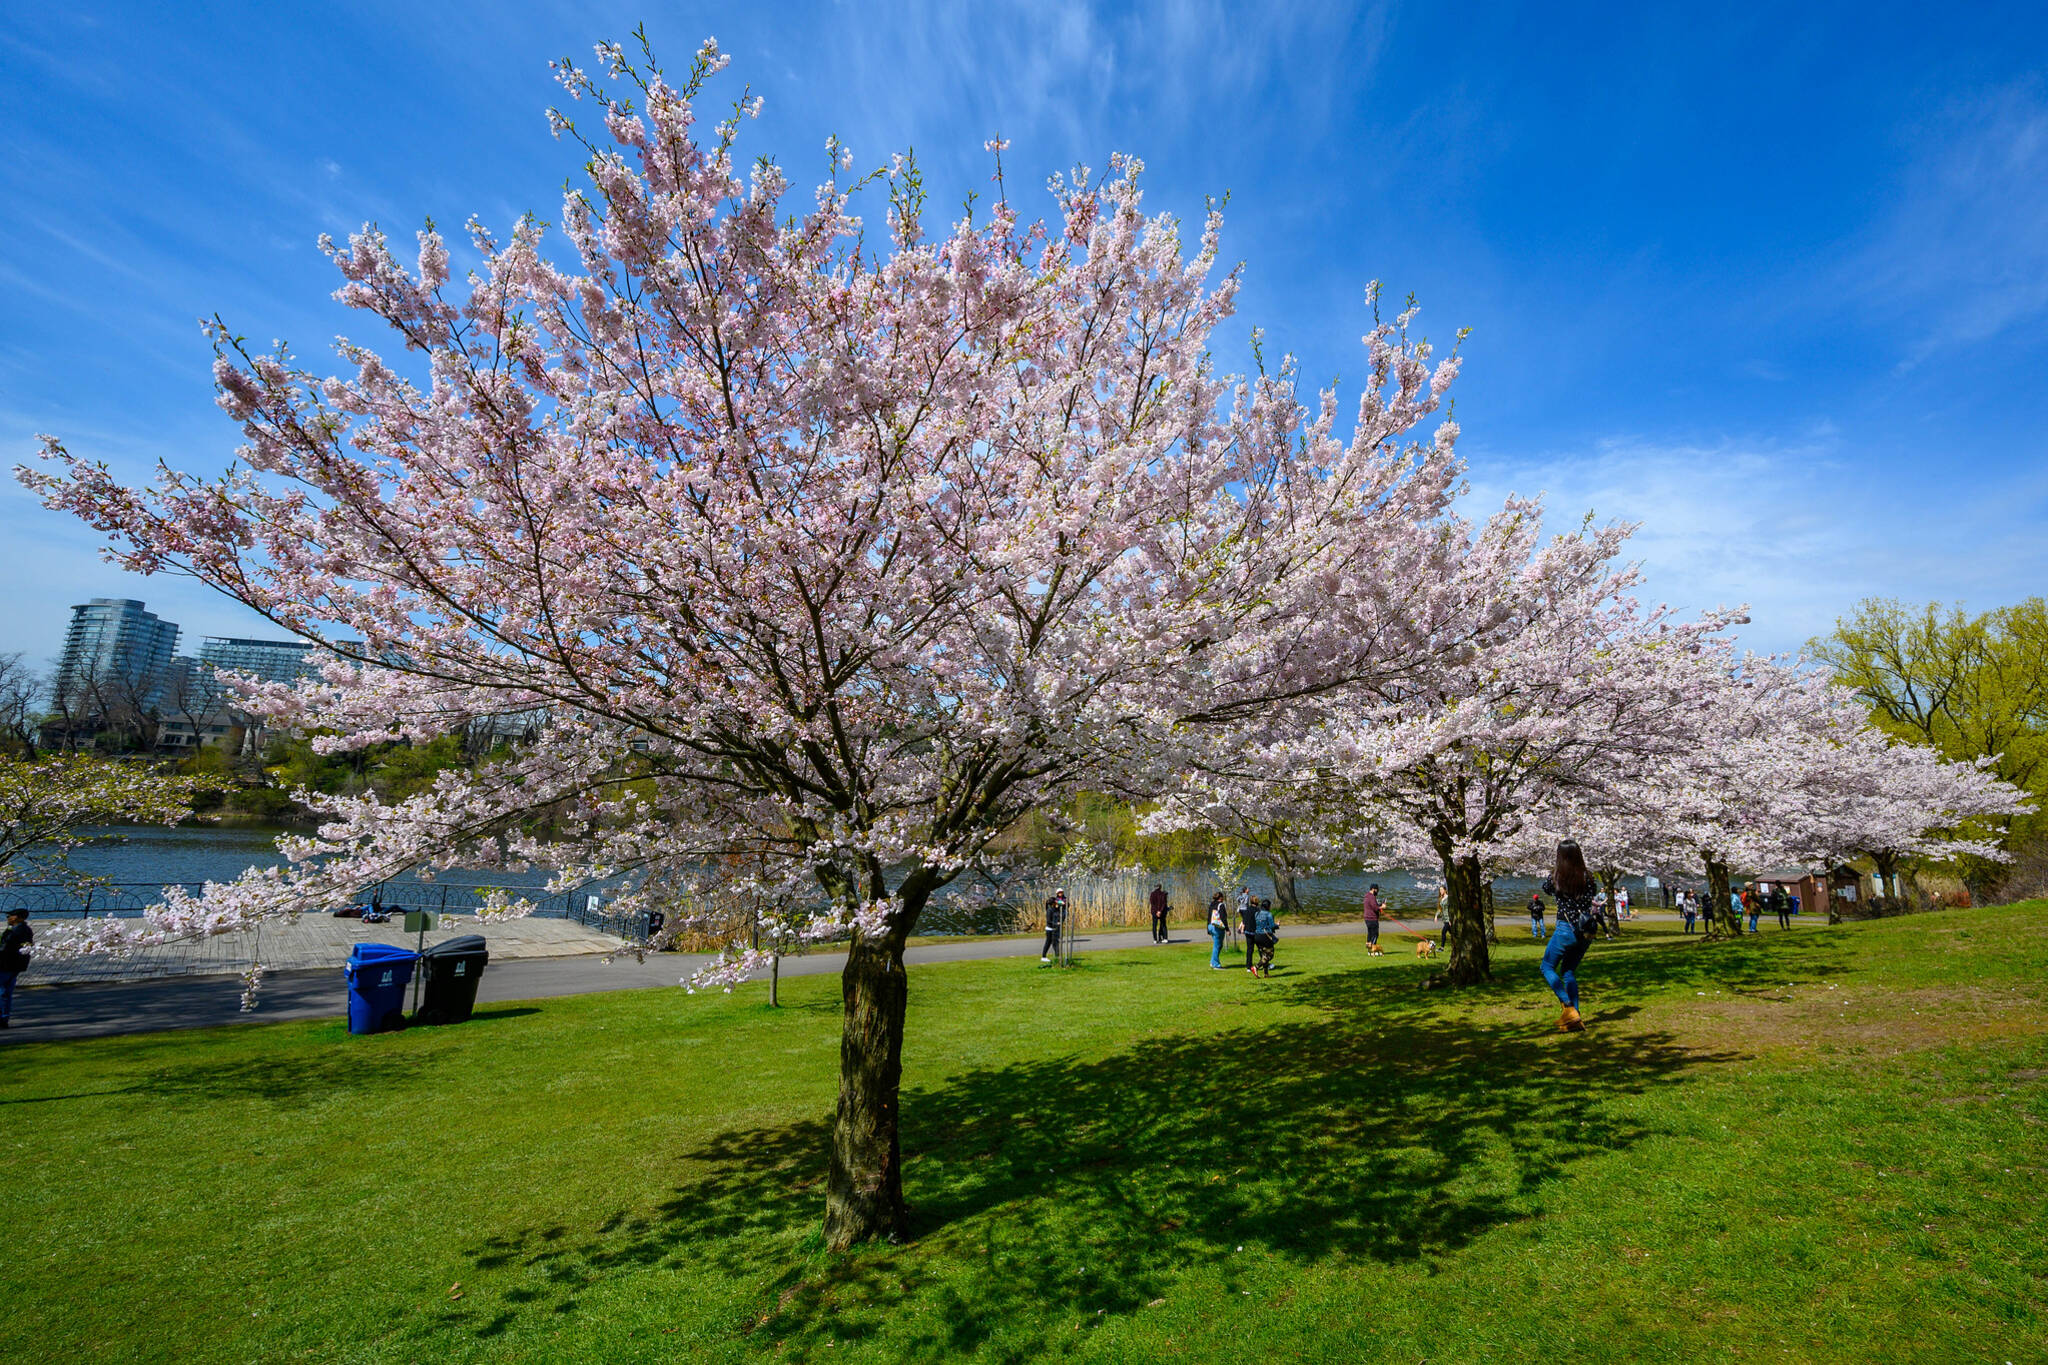 Cherry blossoms are now in bloom at High Park in Toronto